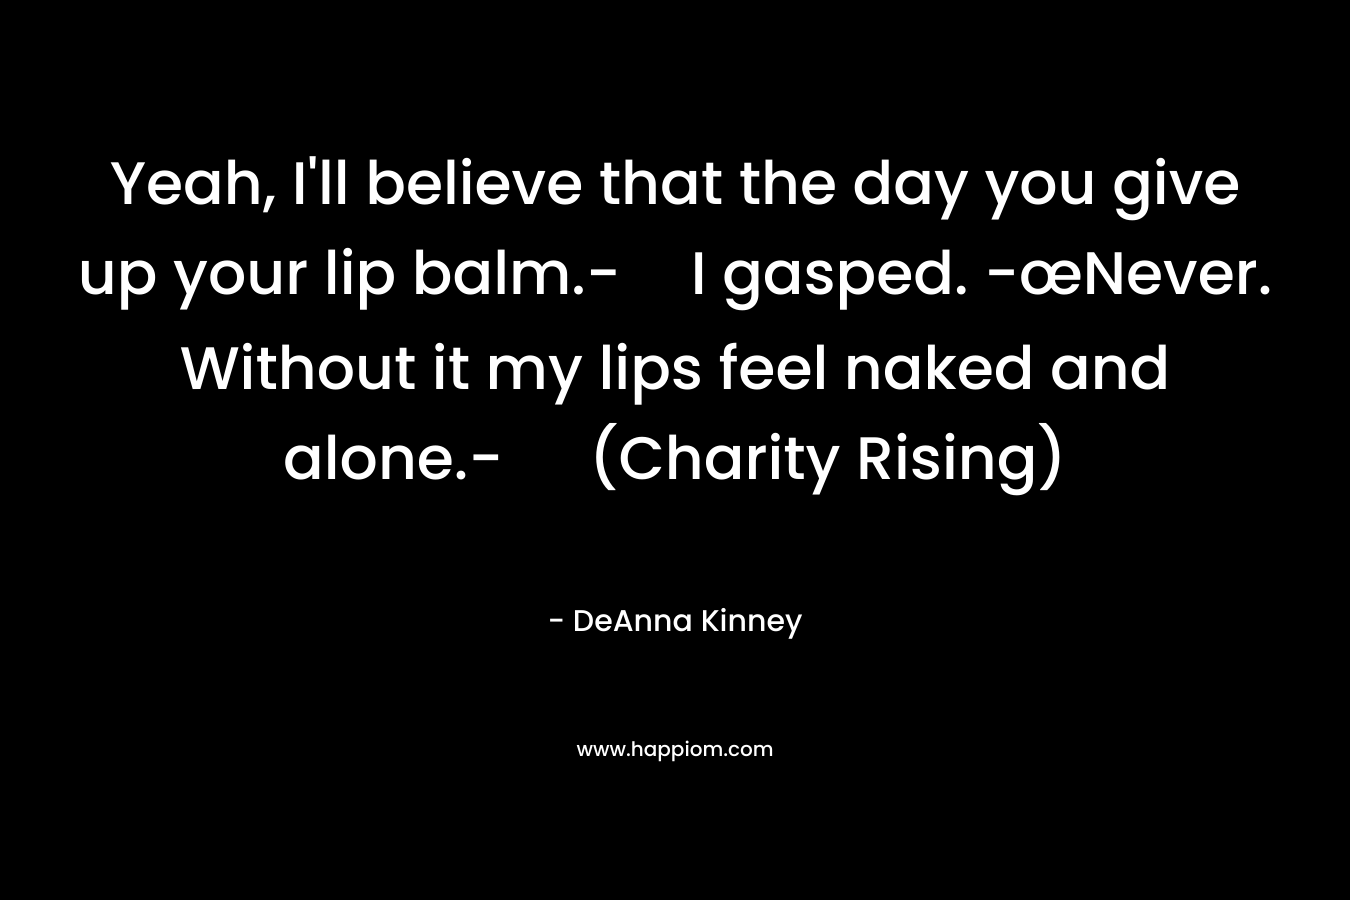 Yeah, I’ll believe that the day you give up your lip balm.-I gasped. -œNever. Without it my lips feel naked and alone.- (Charity Rising) – DeAnna Kinney